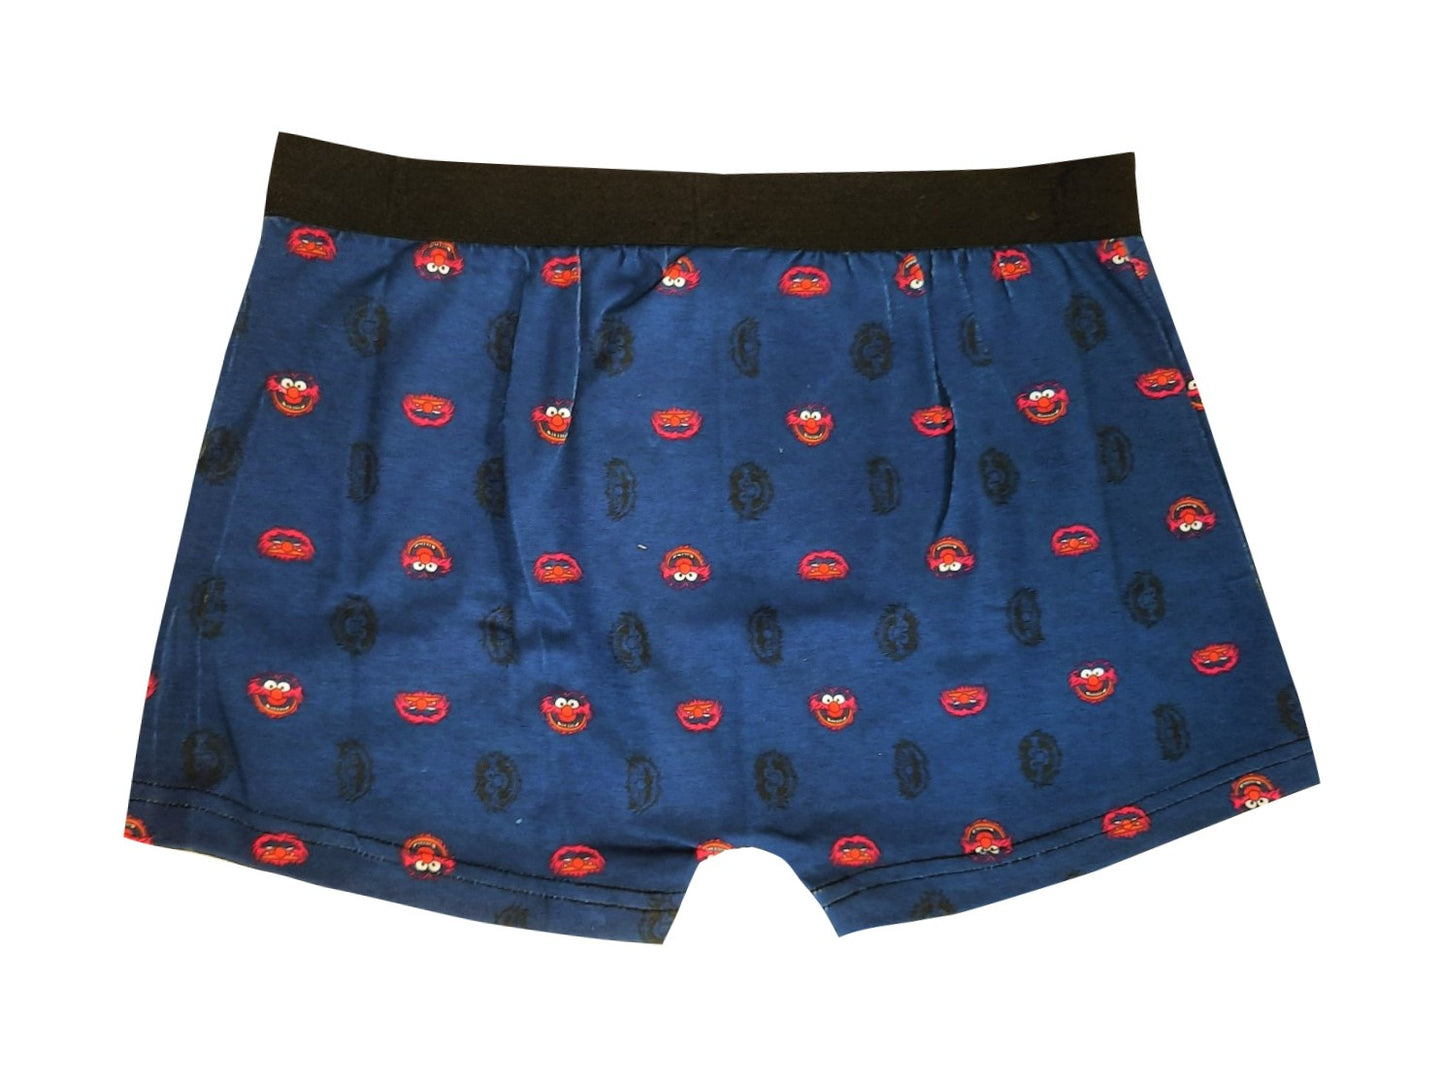 1 Pair The Muppets Animal Adult's Boxer Shorts Trunks Size Small